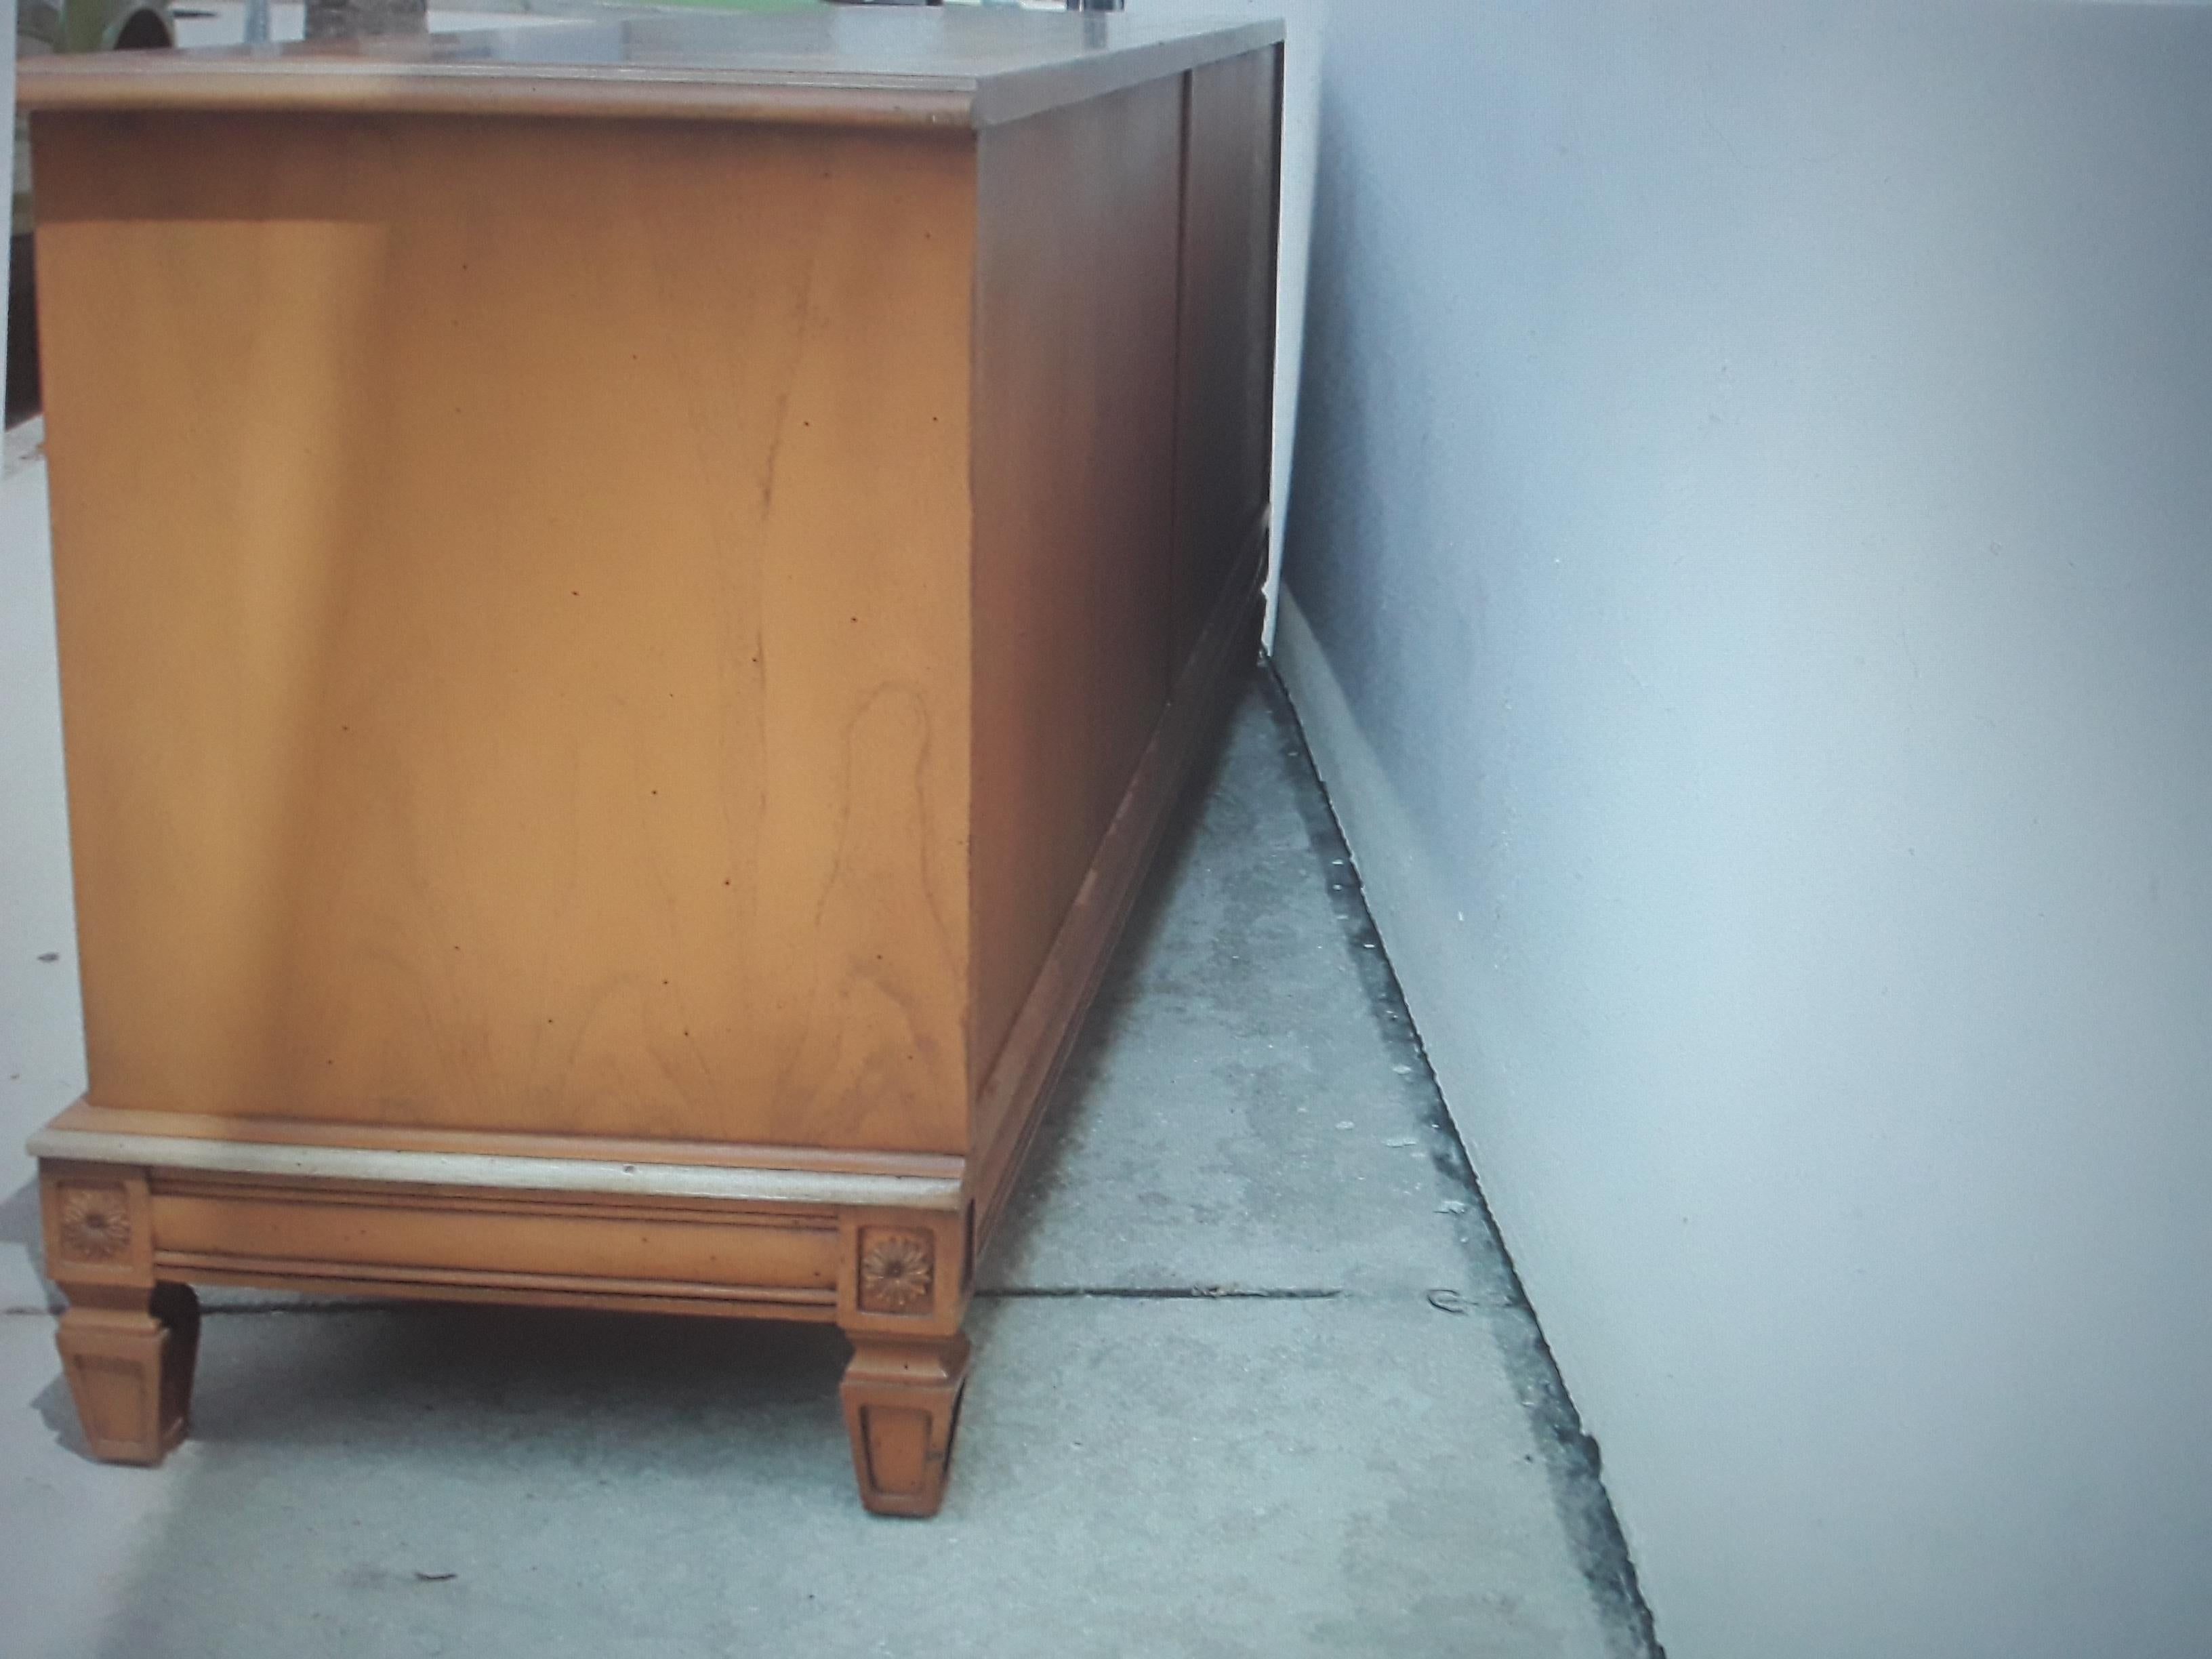 Beautiful 1960's Mid Century Modern Low Sideboard/ Buffet/ Credenza/ Dry Bar. This buffet is in an orange brown tone. Lovely buffet!